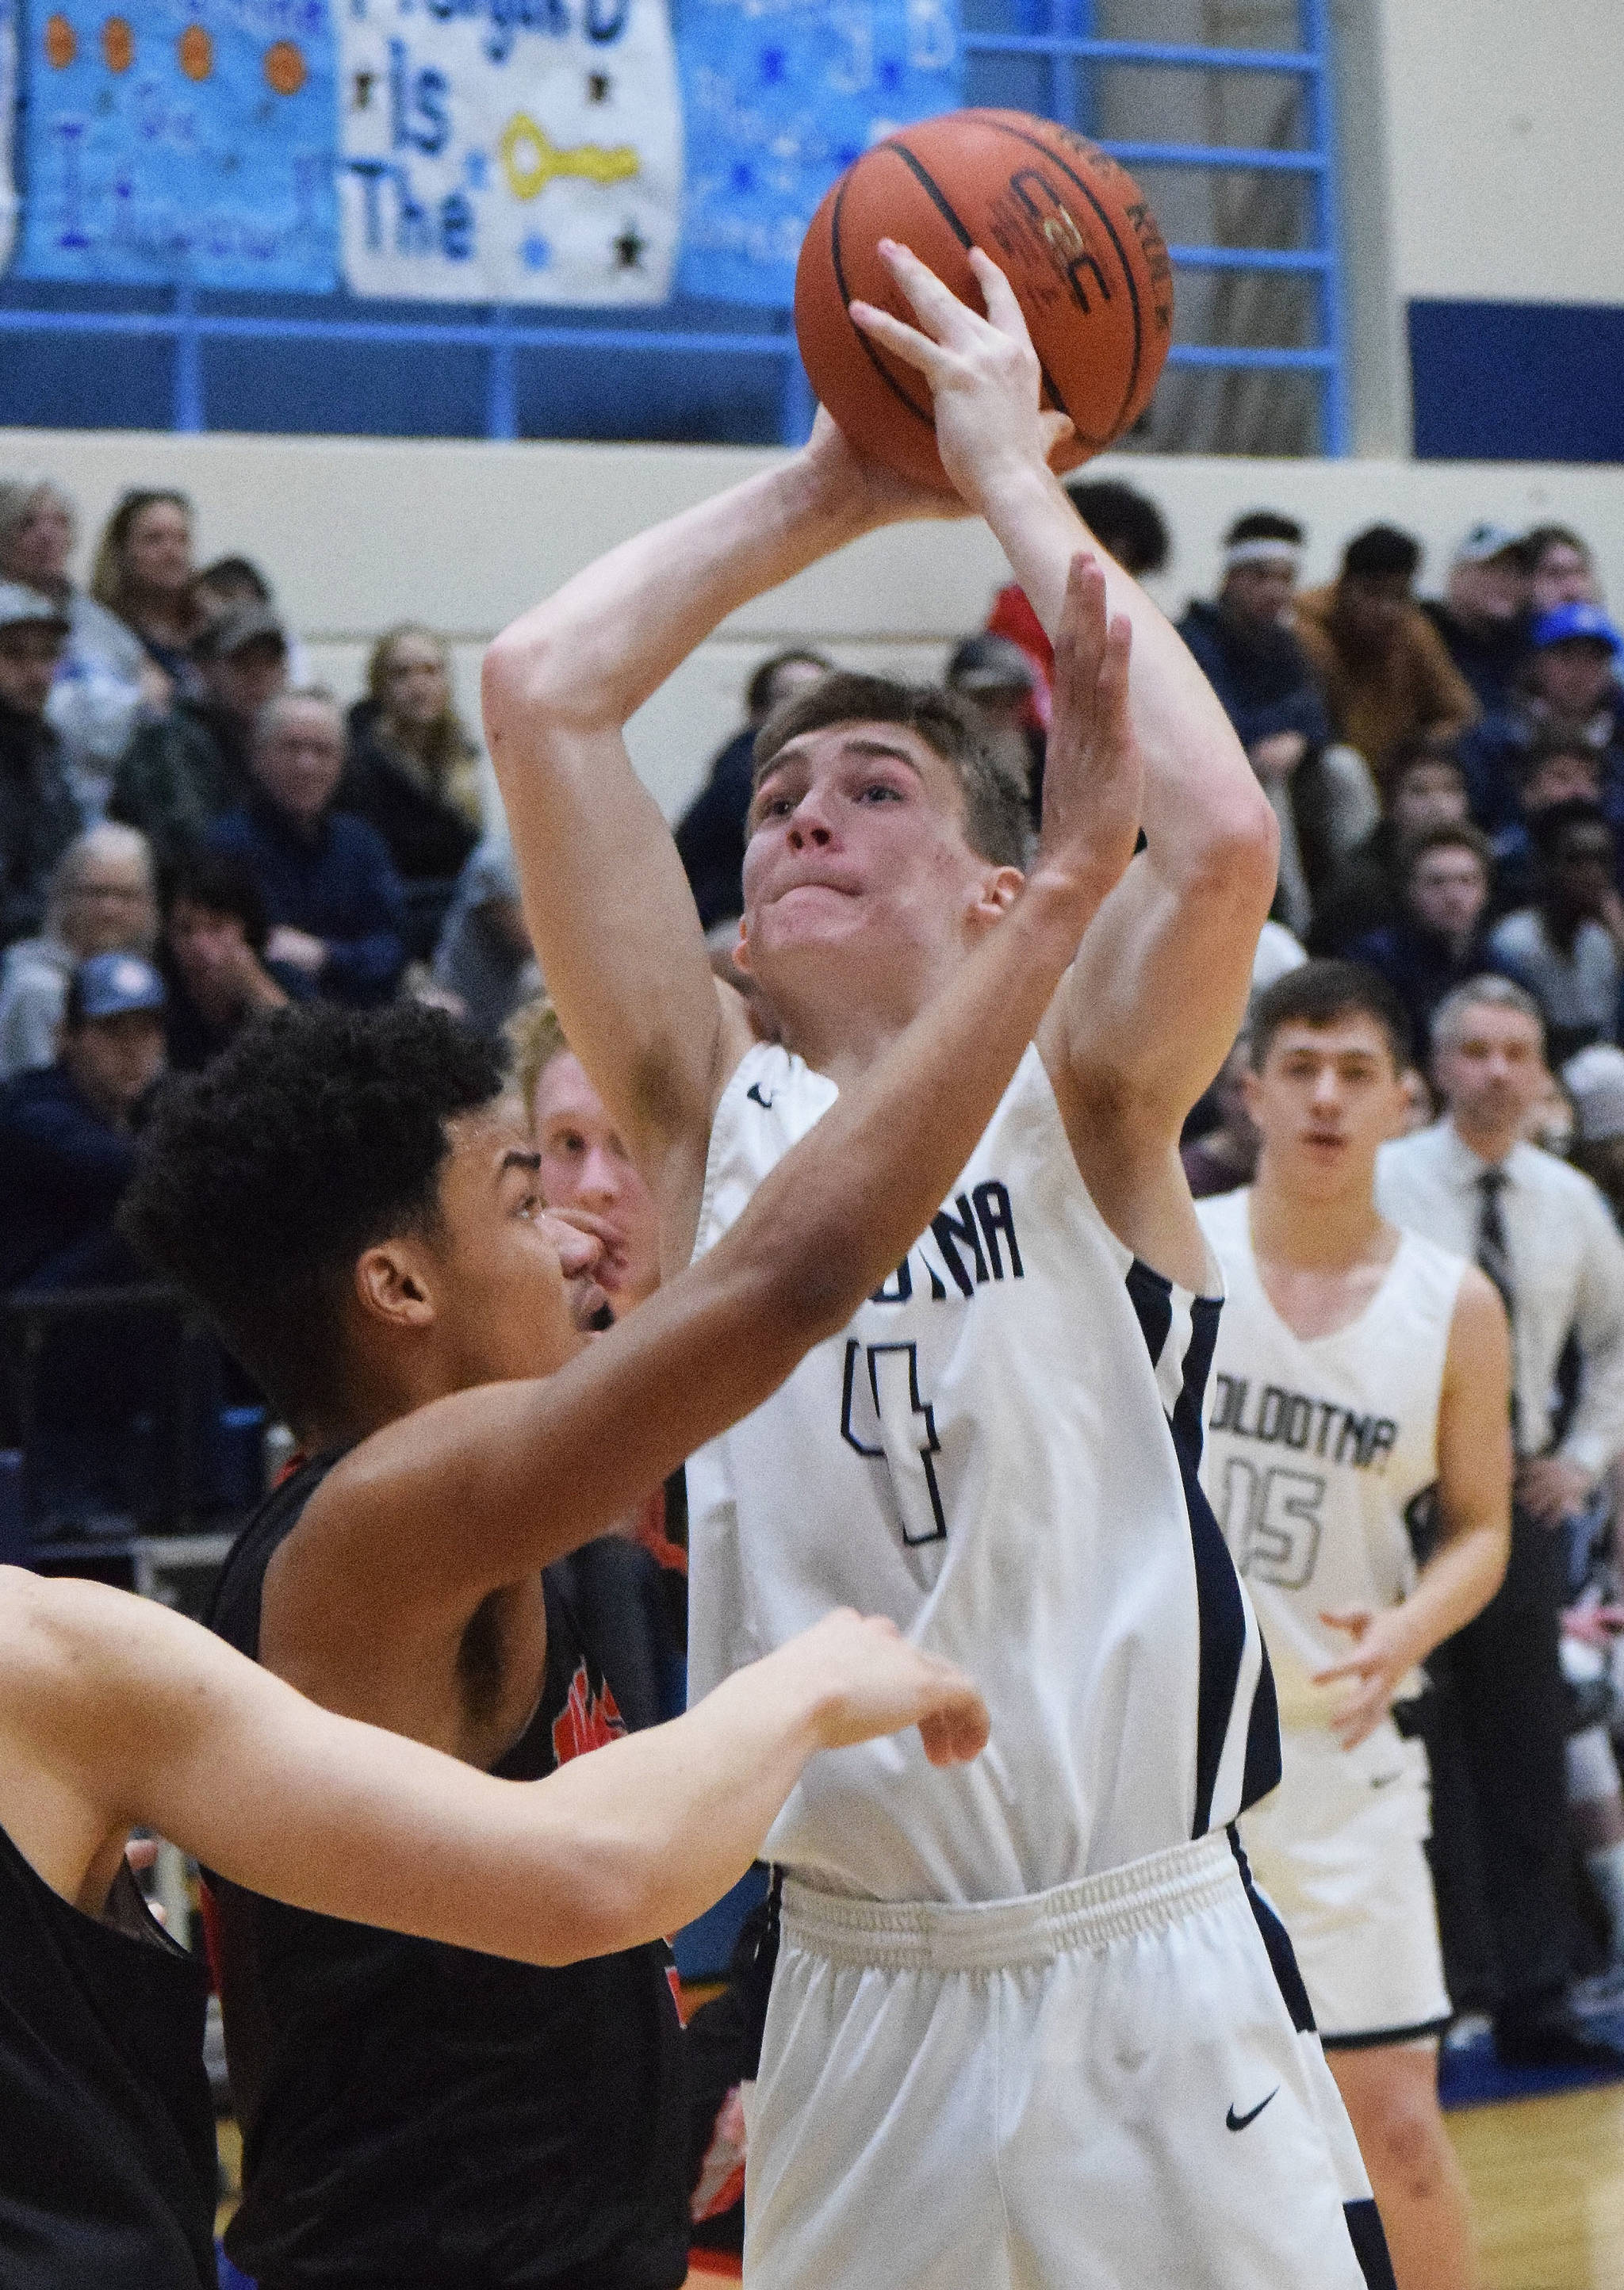 Soldotna’s Tyler Morrison (4) puts up a shot against Wasilla’s Daniel Headdings Friday night in a conference meeting at Soldotna High School. (Photo by Joey Klecka/Peninsula Clarion)